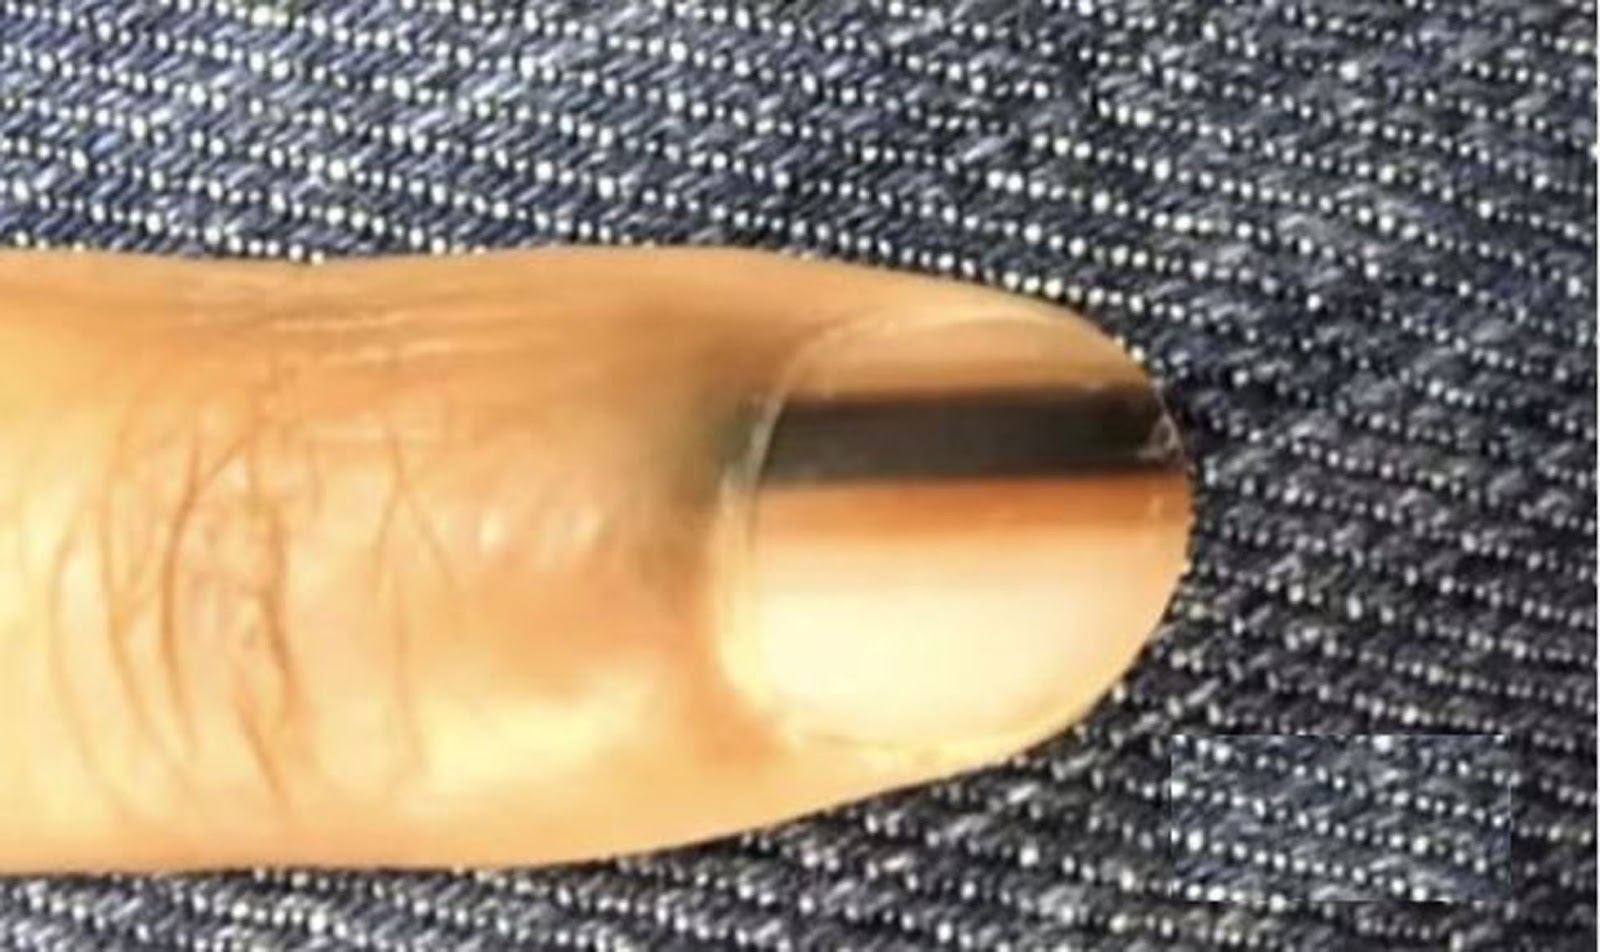 Warning If You See This Black Line On Your Nail Or Someone Else’s This